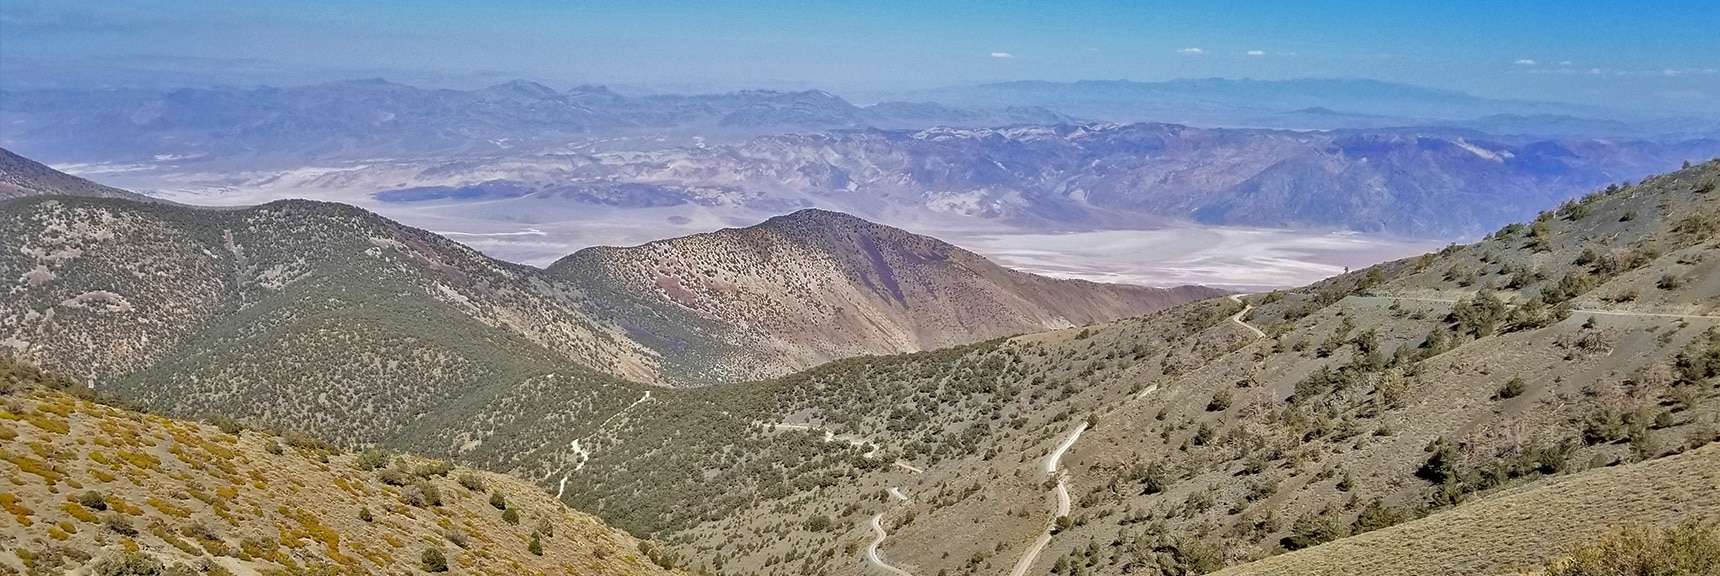 3,100ft Plunge Down Roads from Rogers Peak Summit to Wildrose Charcoal Kilns...at a Run! | Telescope Peak Summit from Wildrose Charcoal Kilns Parking Area, Panamint Mountains, Death Valley National Park, California